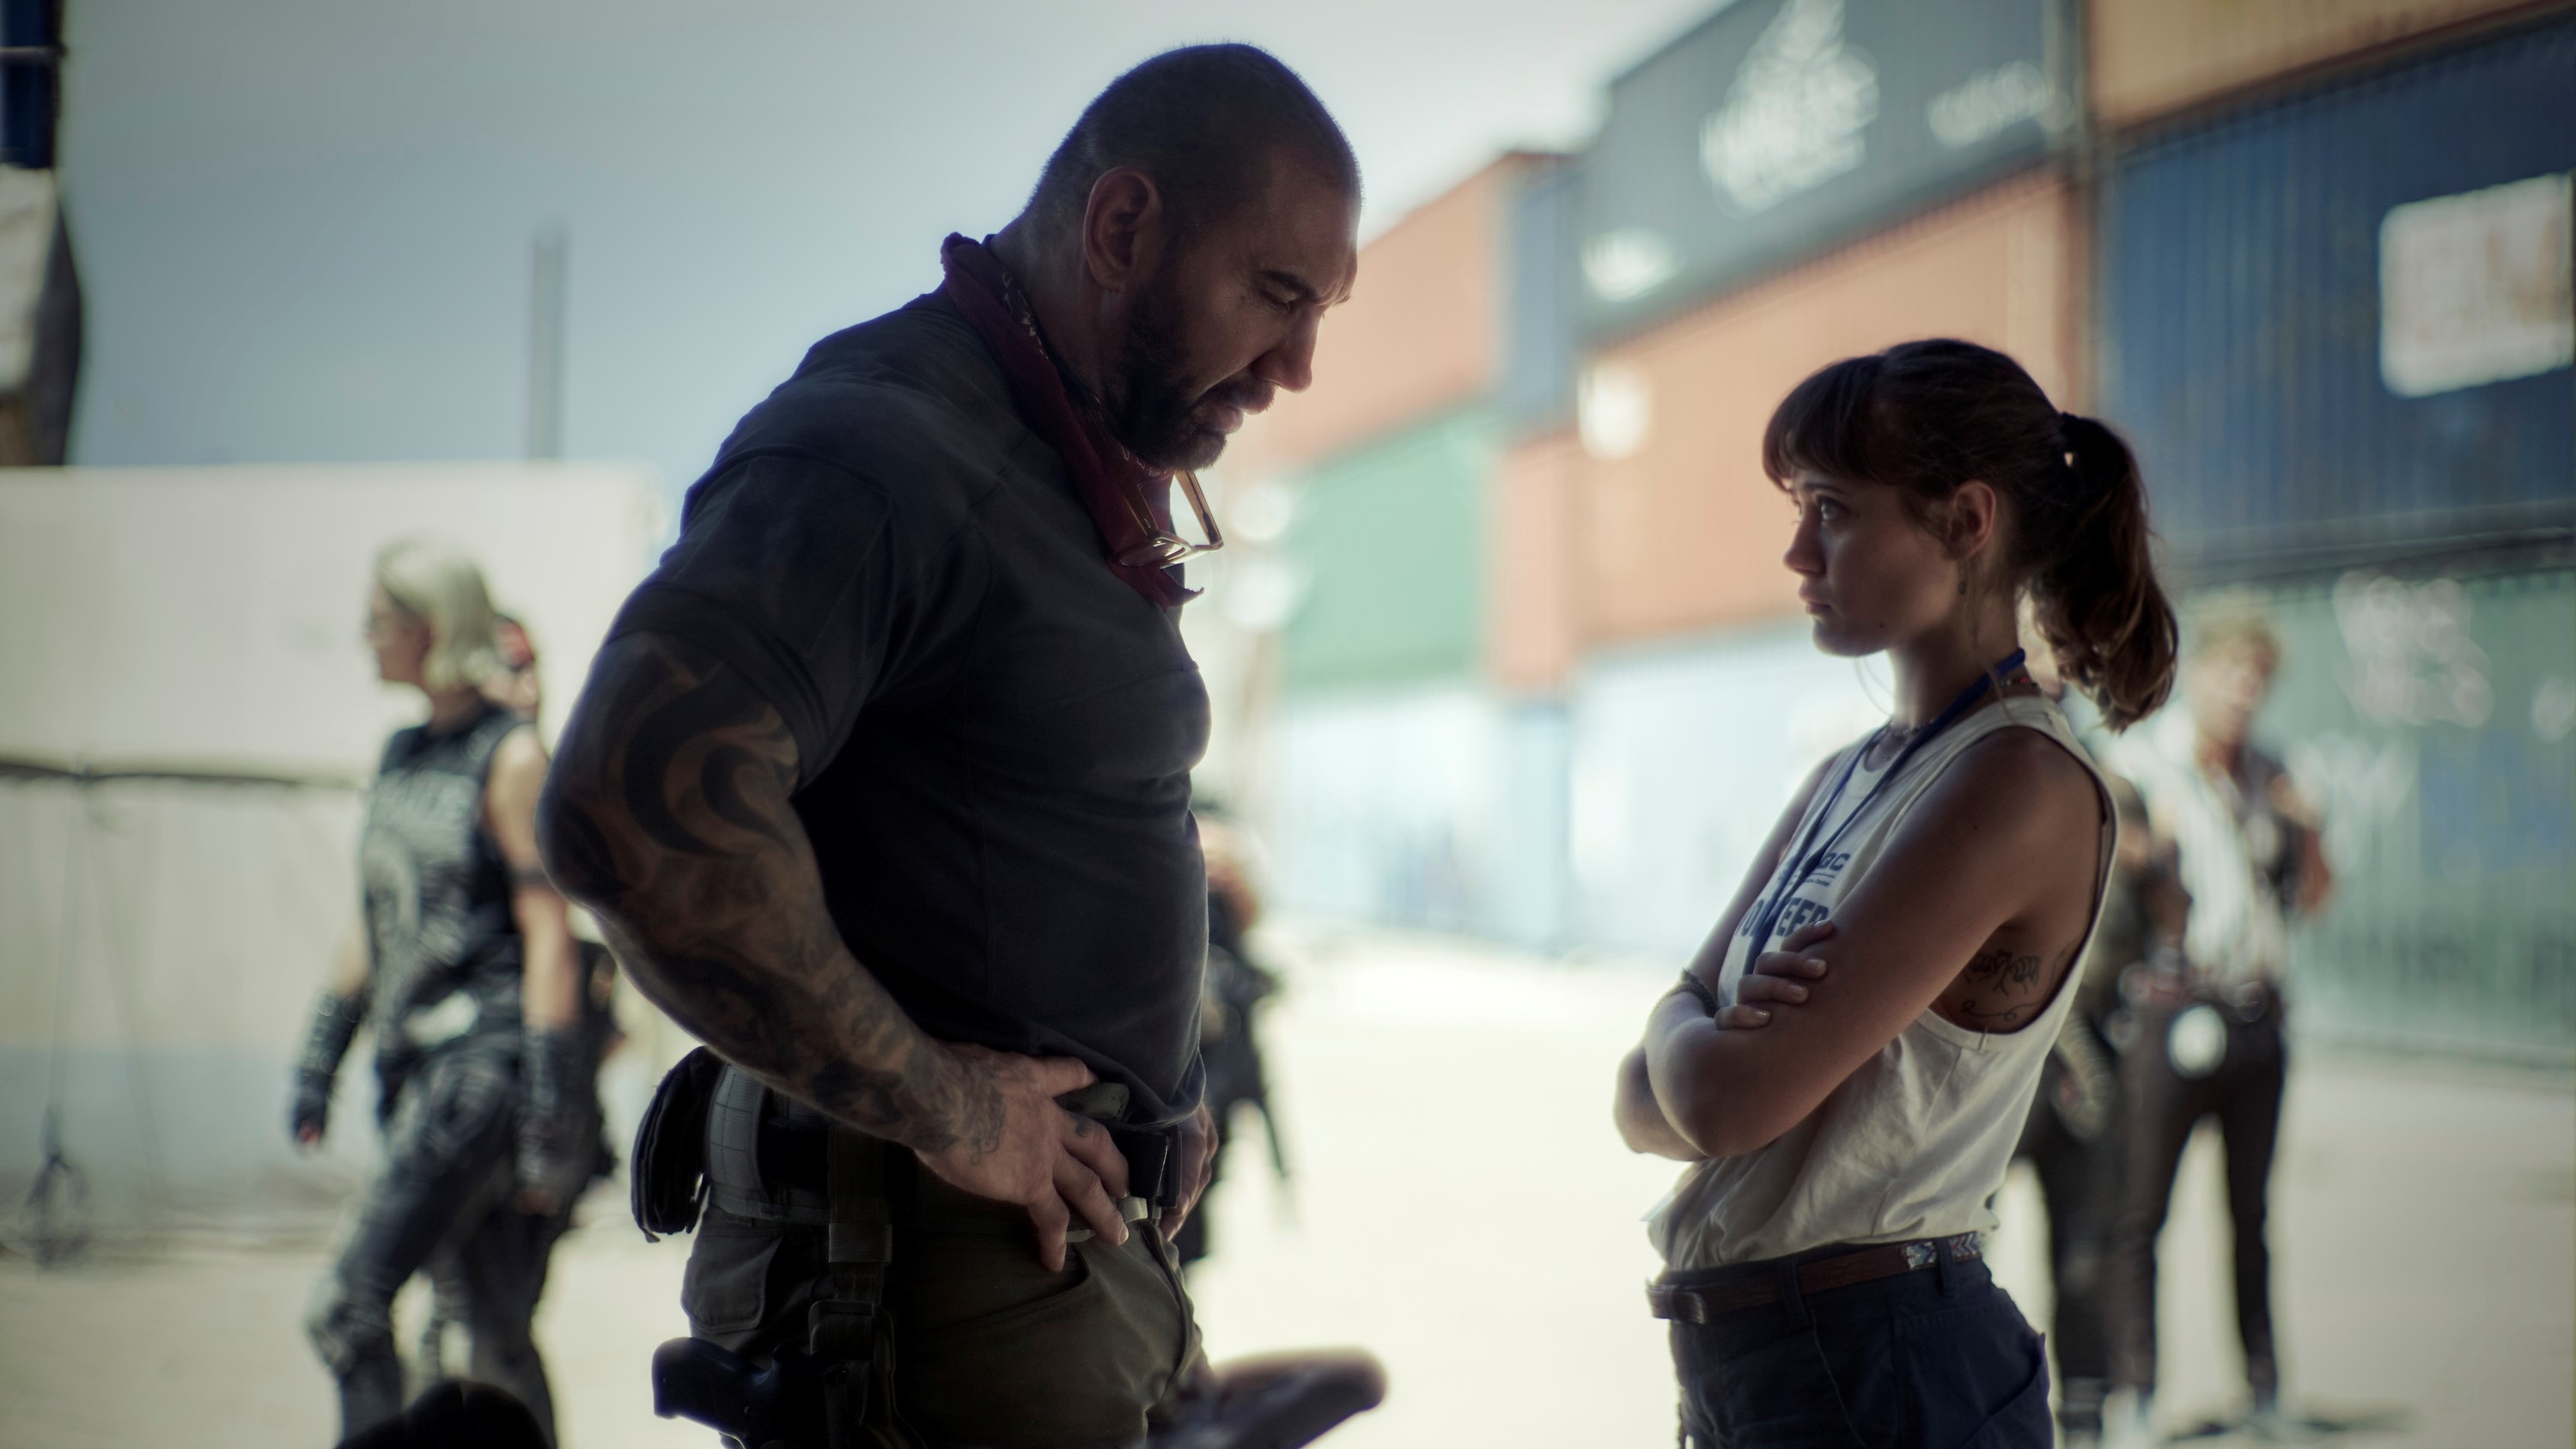 Dave Bautista's Scott Ward and Ella Purnell's Kate Ward in Netflix's Army of the Dead